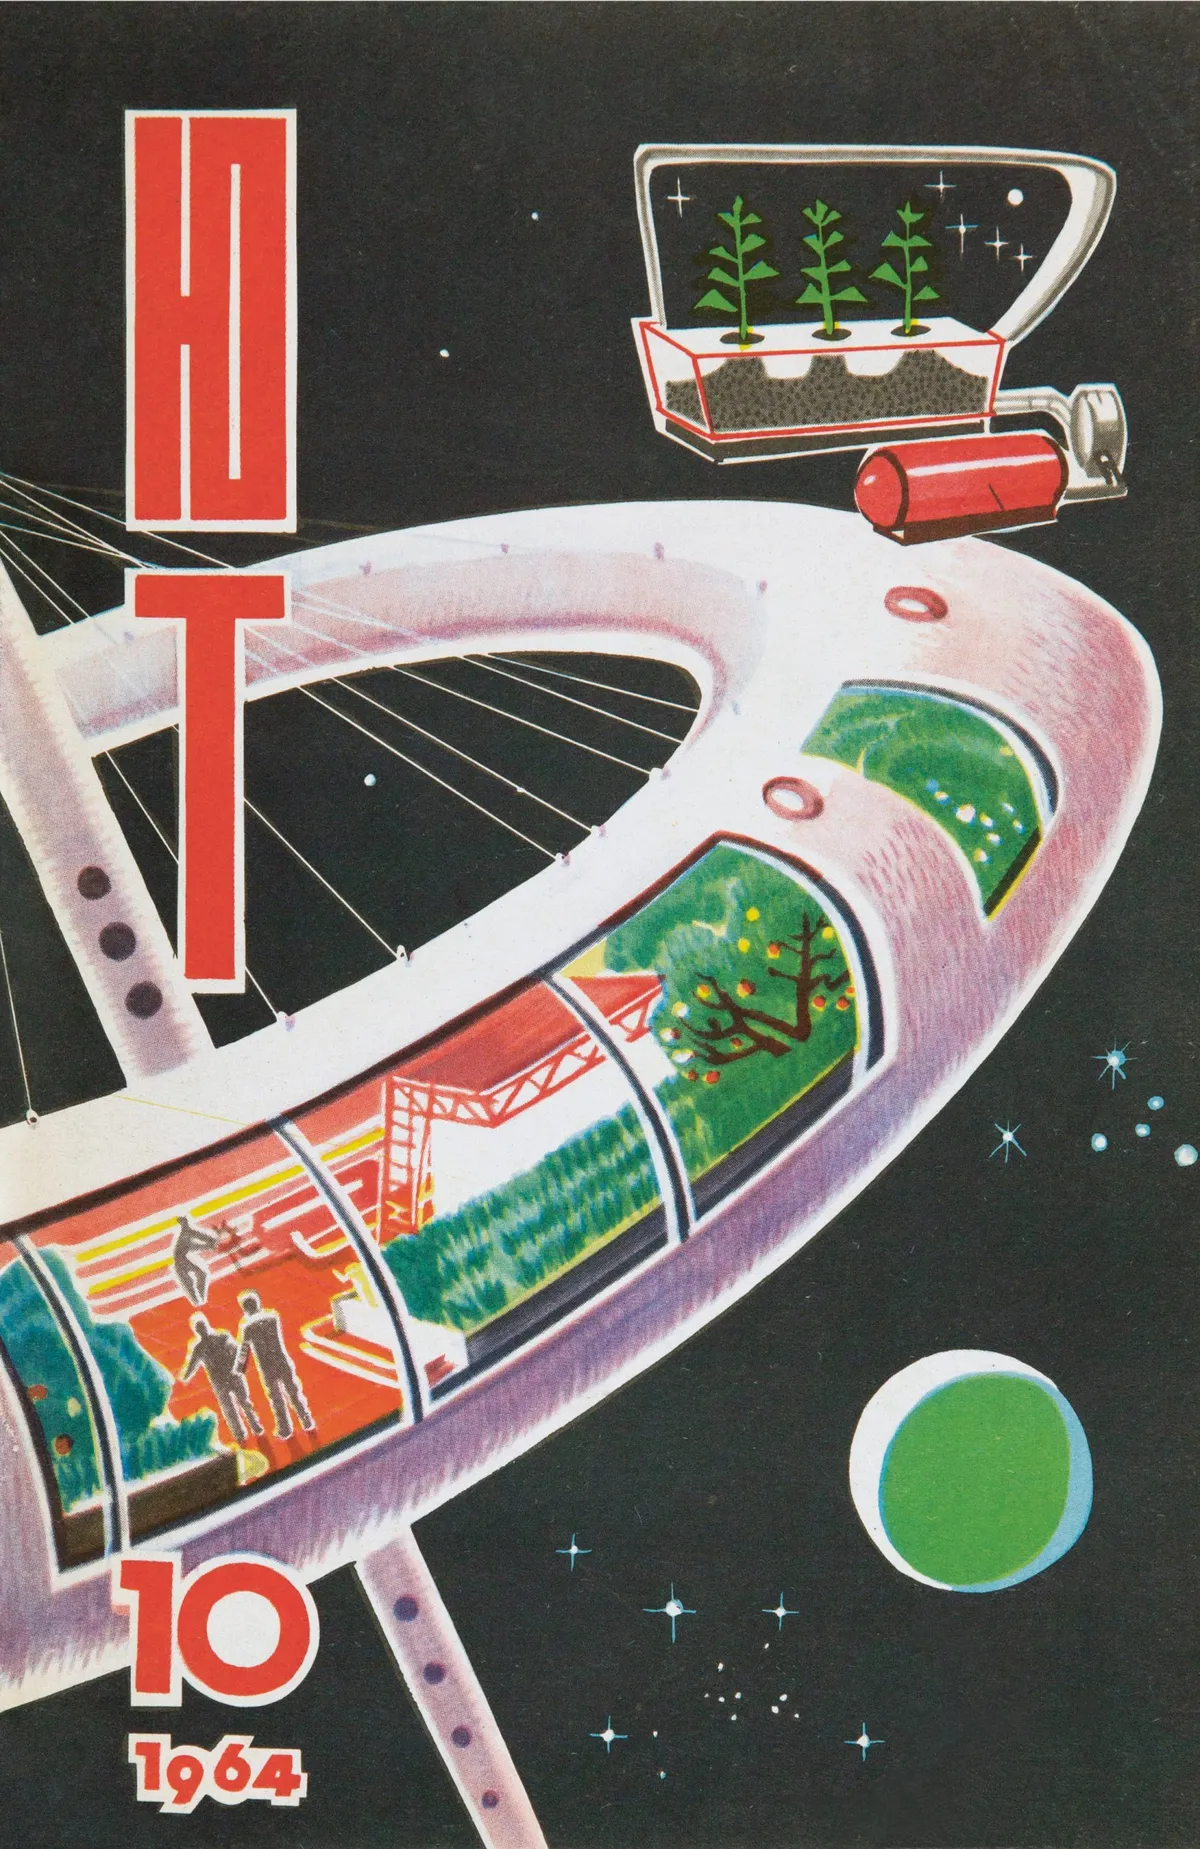 Young Technician, issue 10, 1964, illustration by R. Avotin for the article ‘Space Greenhouse’, which hypothesizes on the creation of an environment suitable for growing plants in space. Picture credit: The Moscow Design Museum